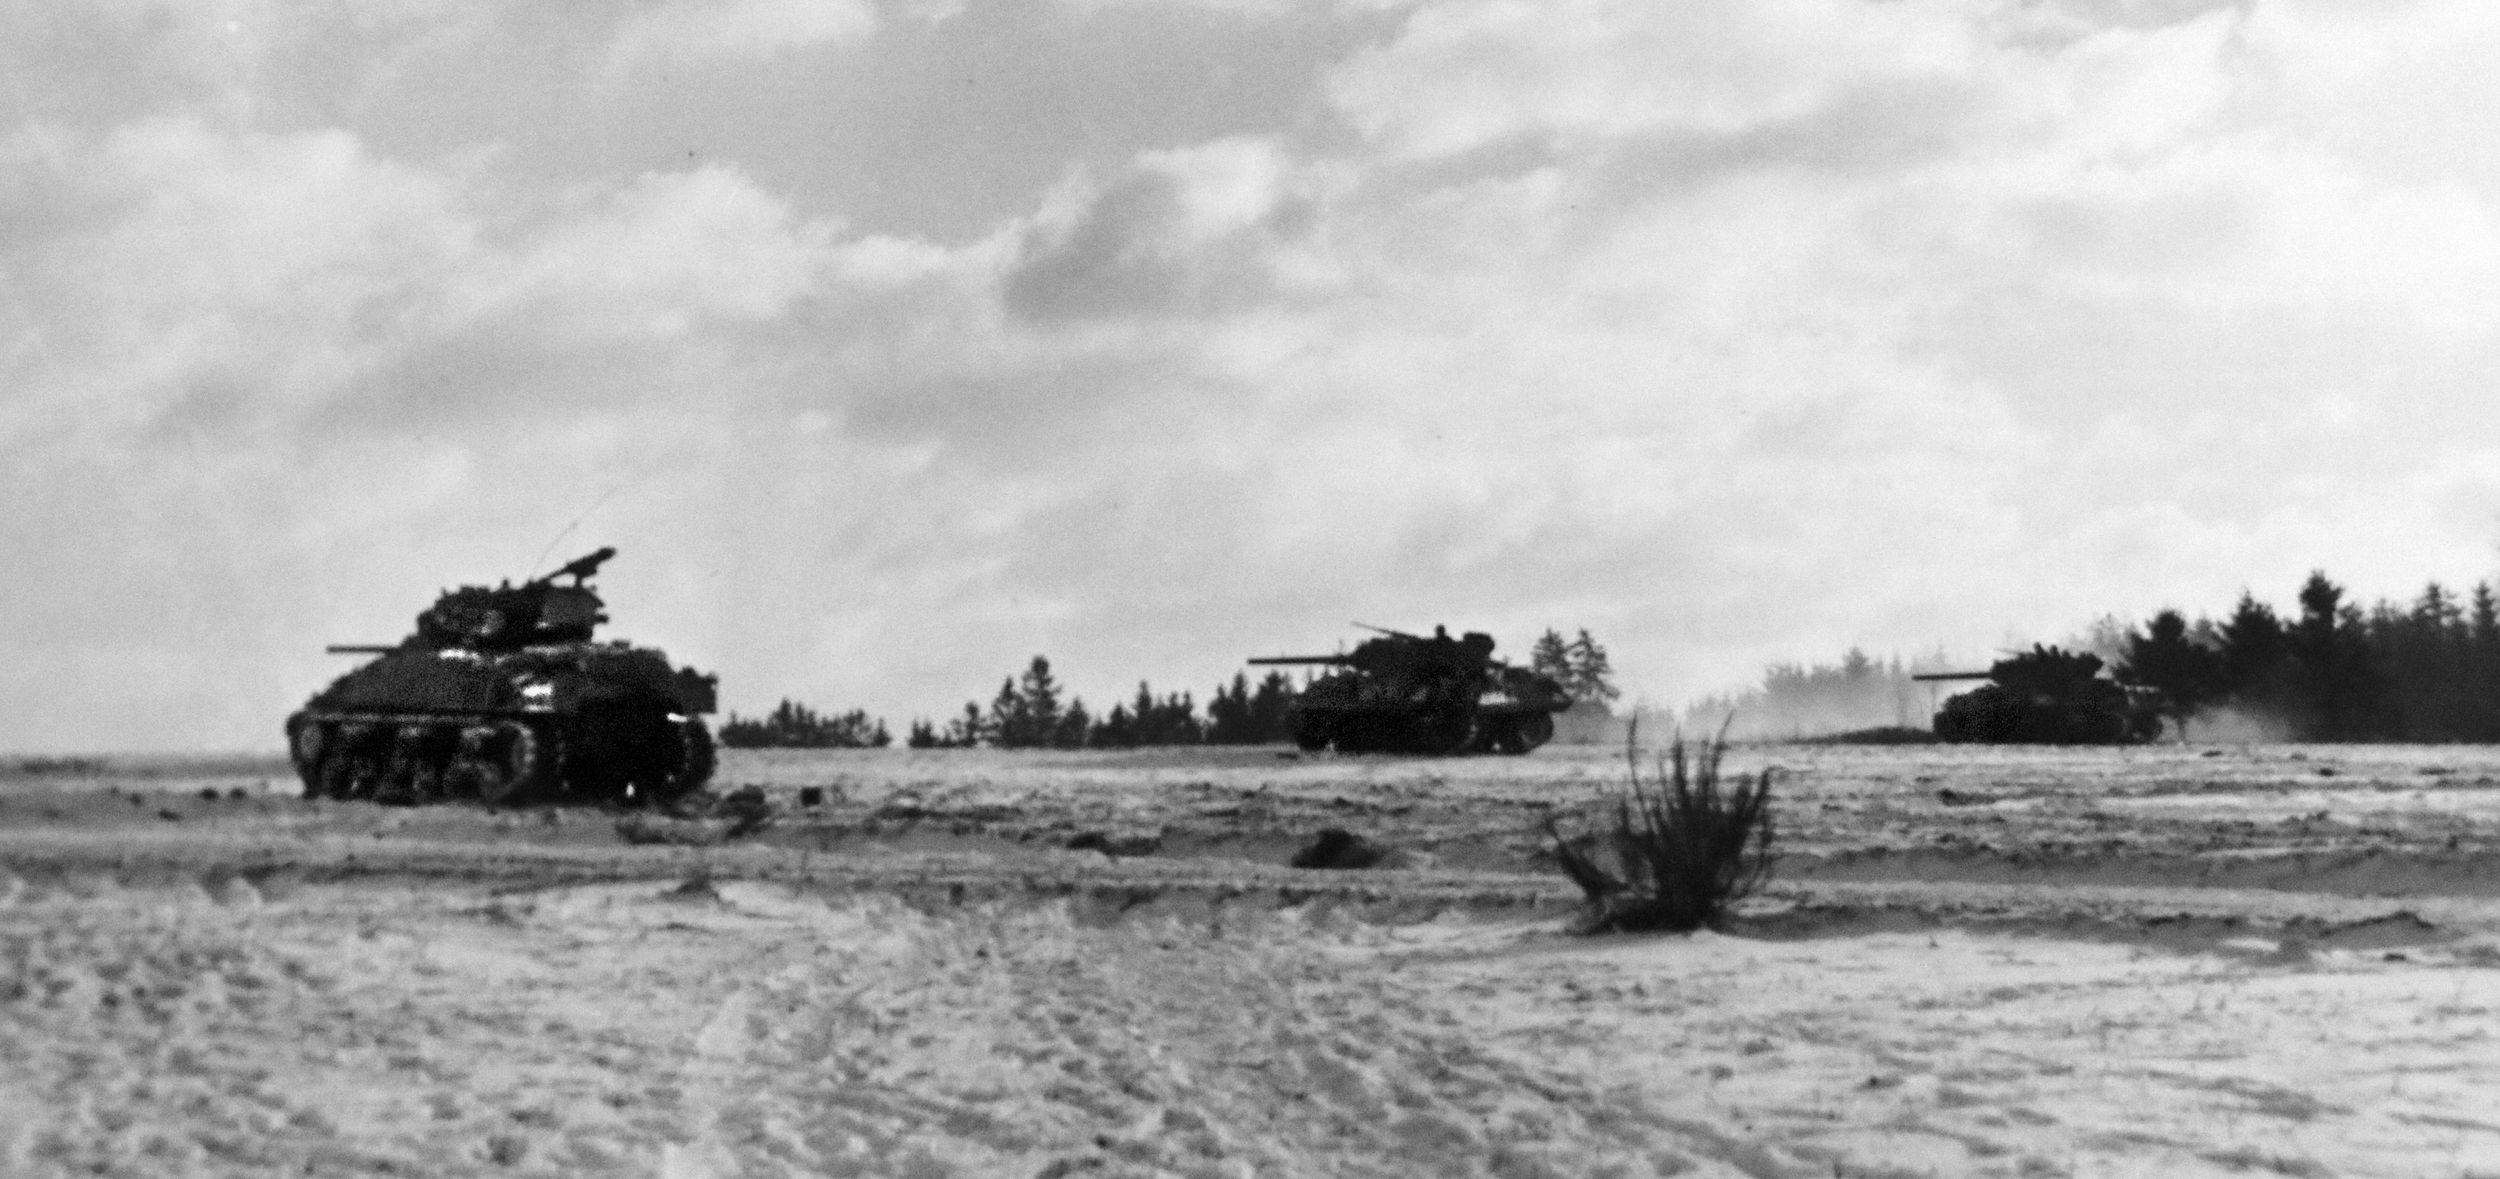 Photographed during an advance across open country at the height of the December 1944 Battle of the Bulge, an M4 Sherman medium tank and M10 tank destroyers proceed warily.